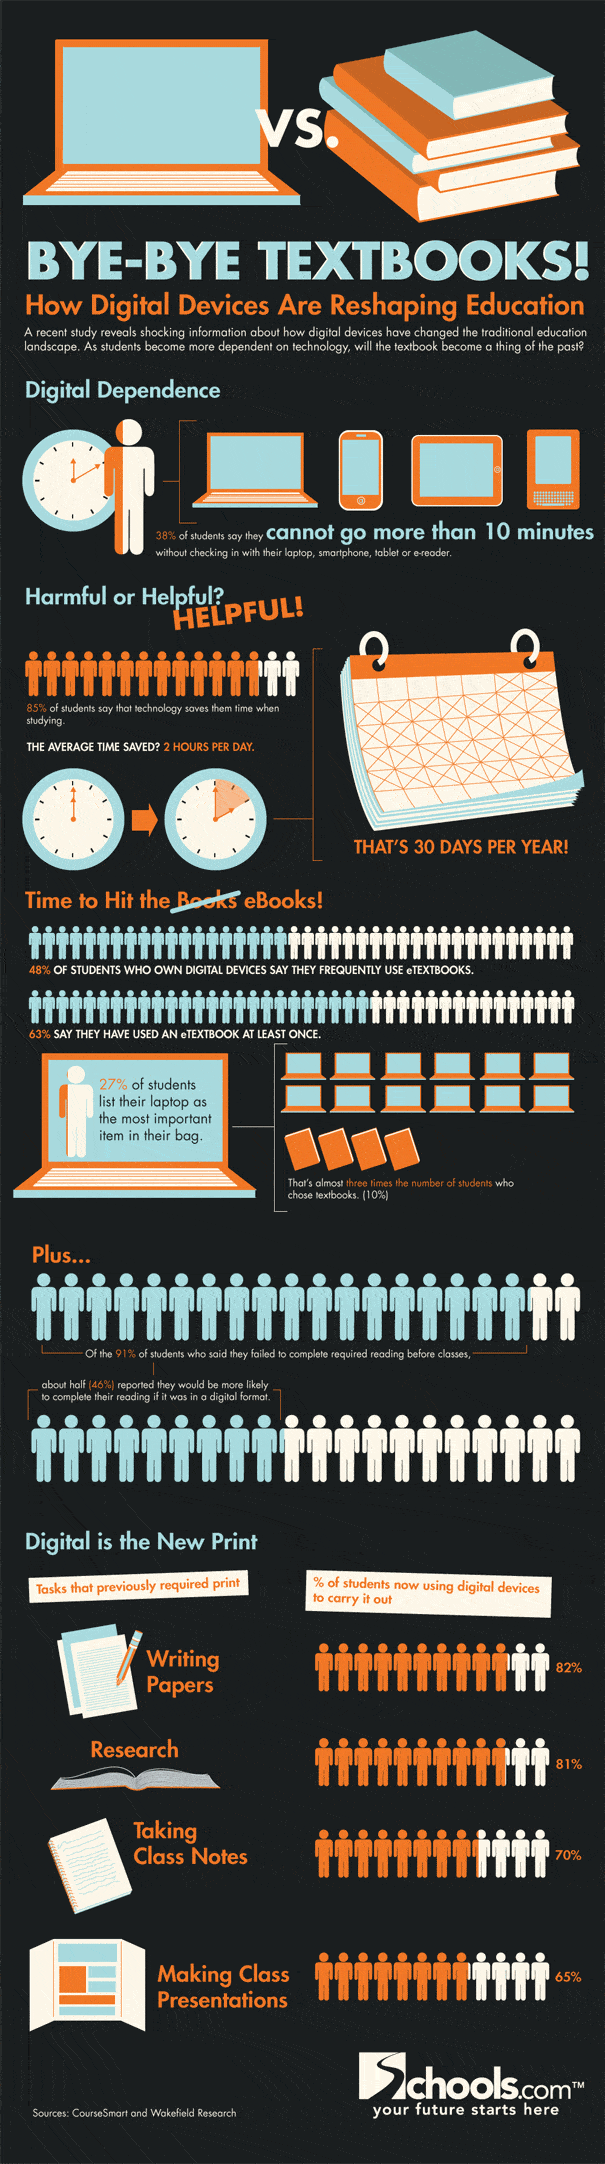 Bye-Bye Textbooks! How Digital Devices Are Reshaping Education Infographic